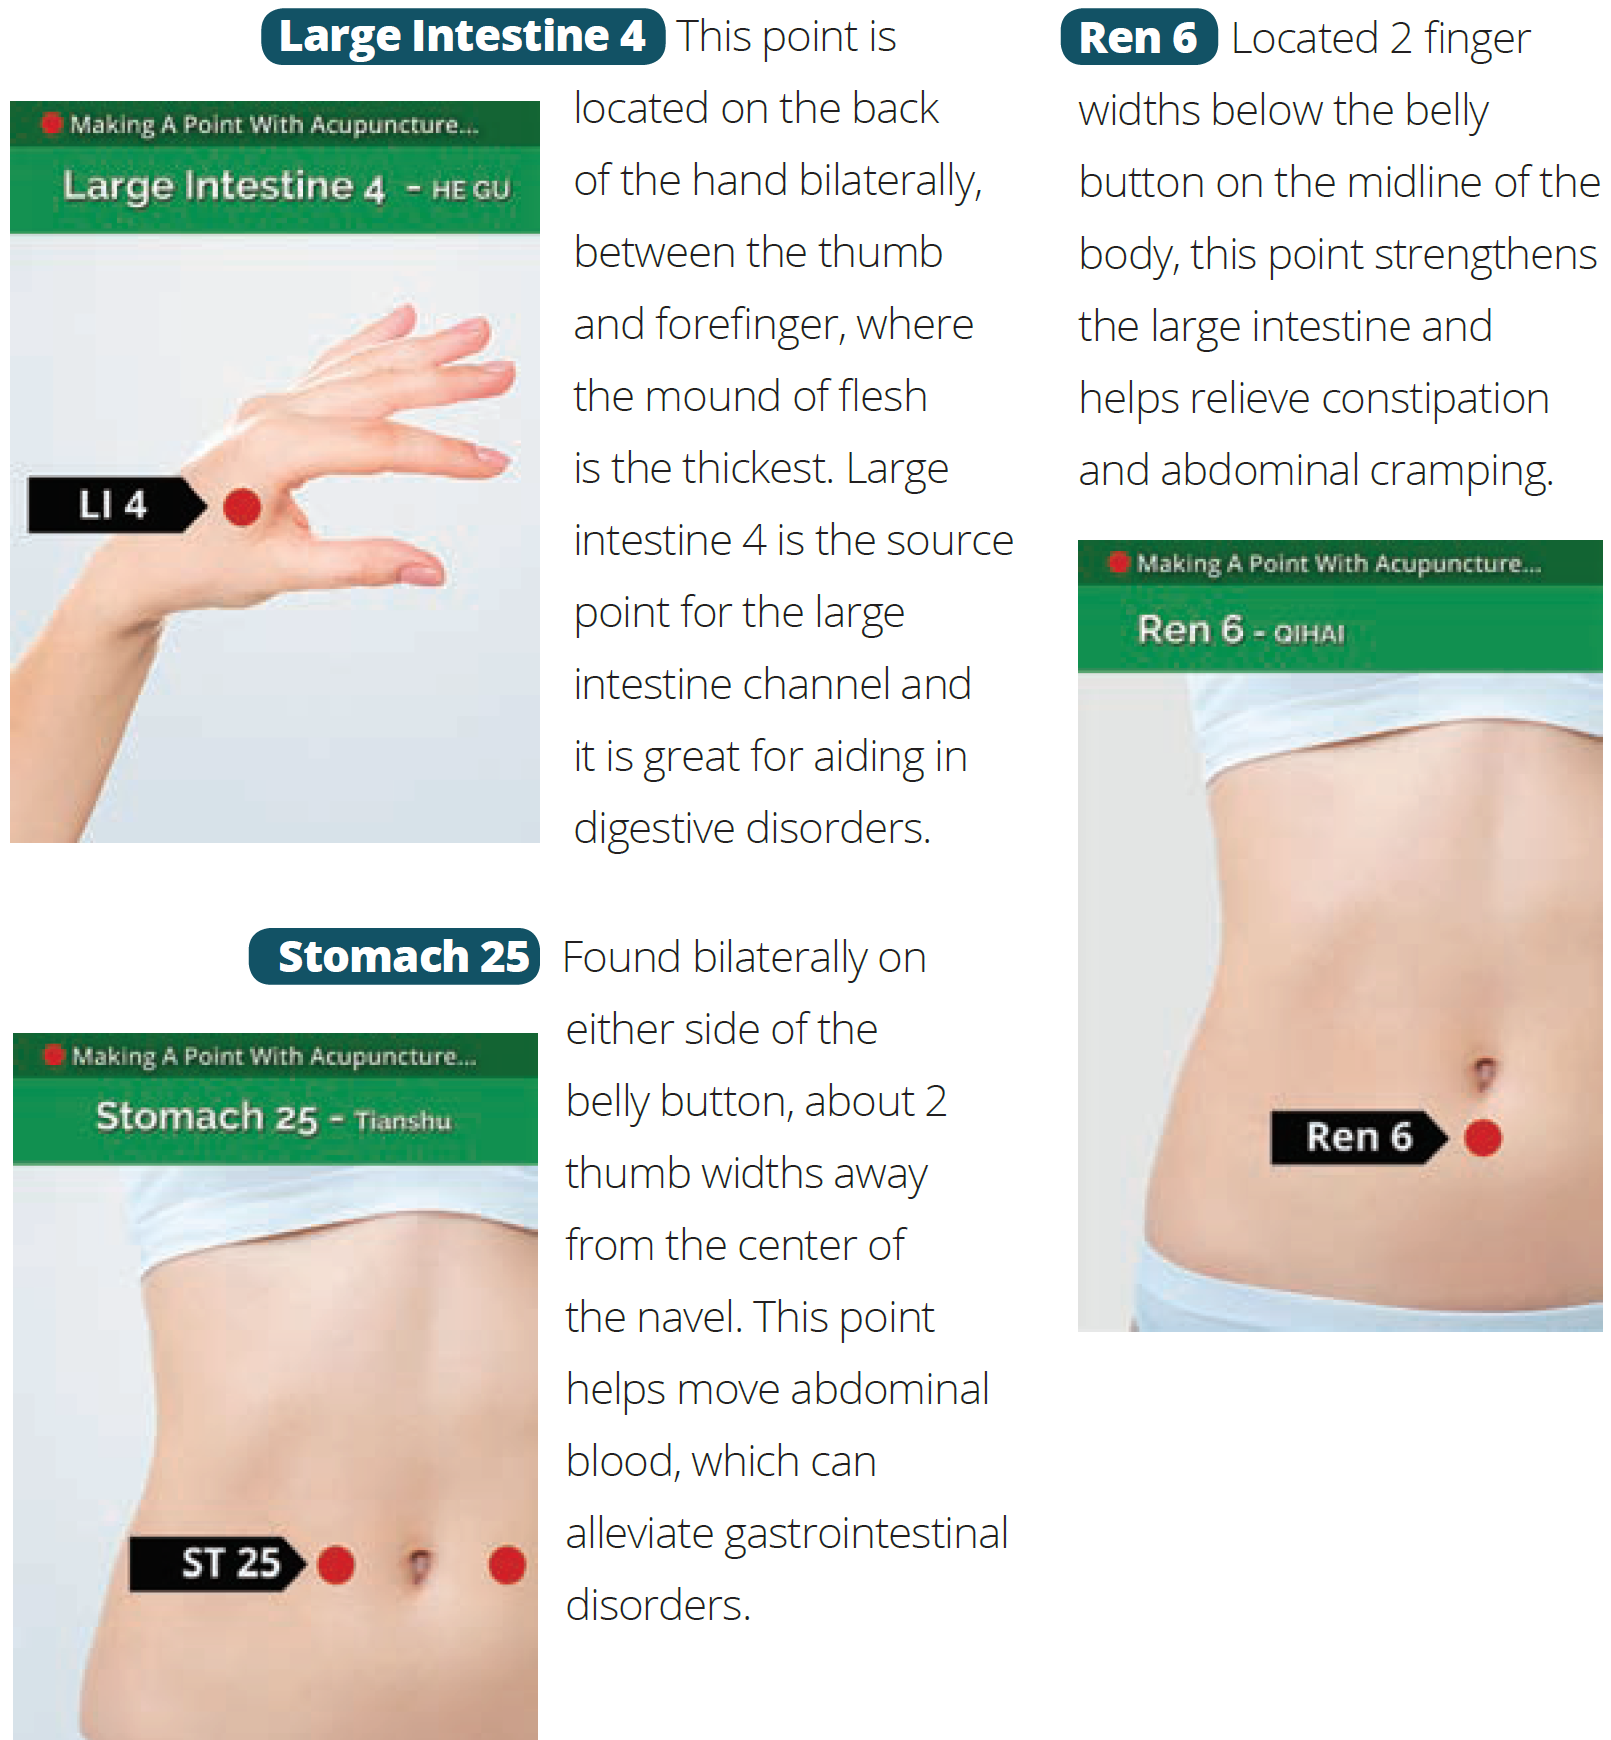 Acupuncture Points for IBS